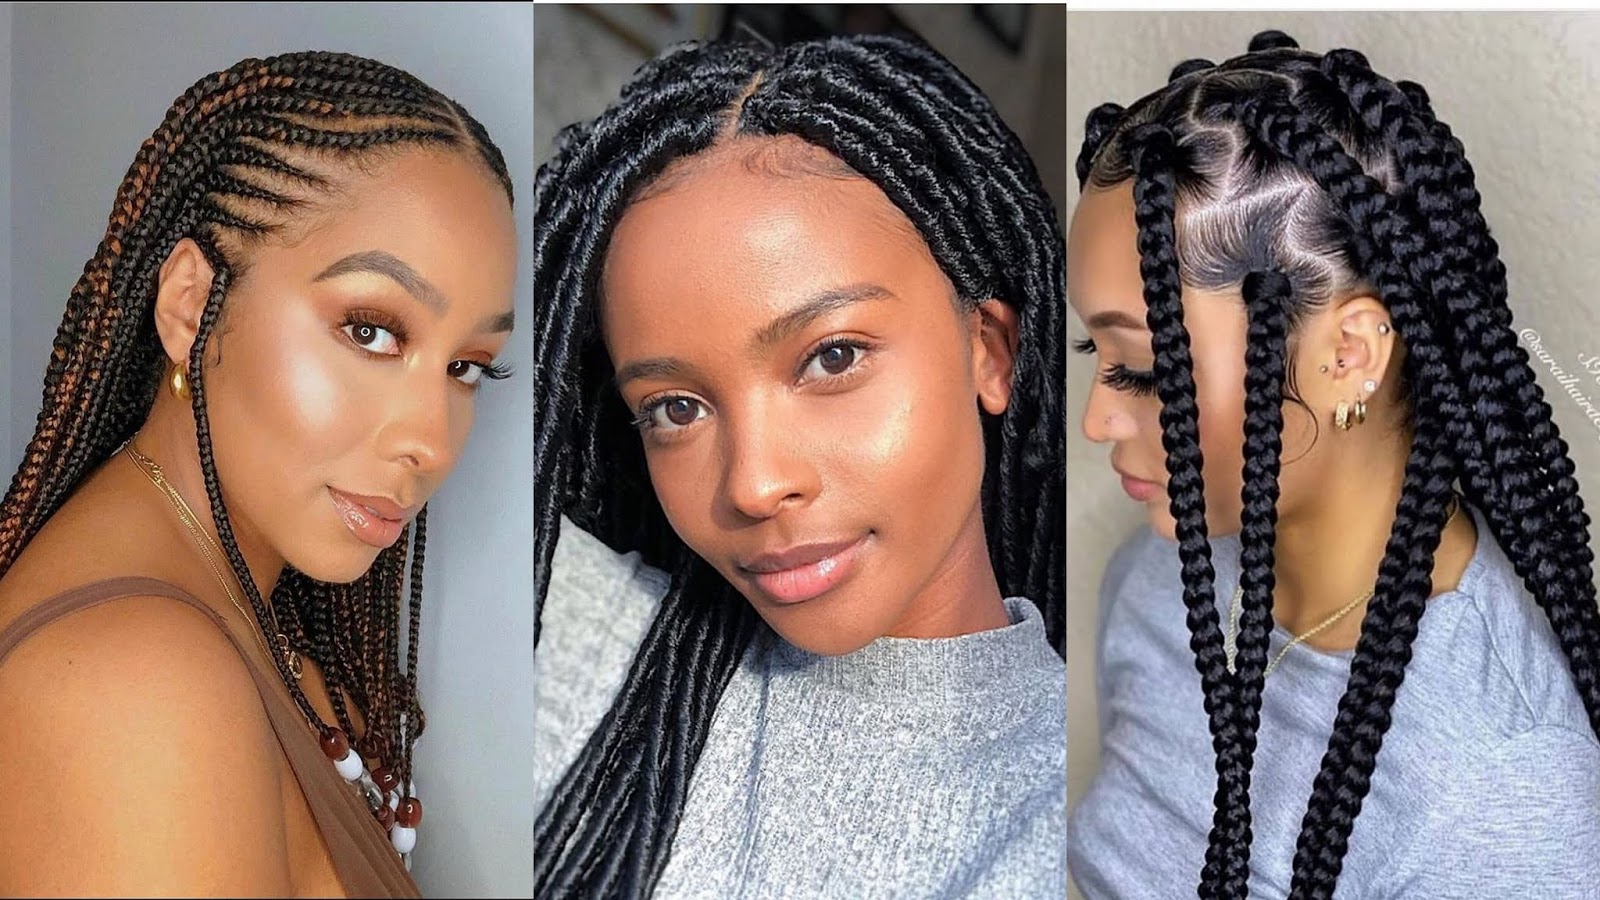 Trendy Braided Hairstyles 2020: Best for ladies to rock